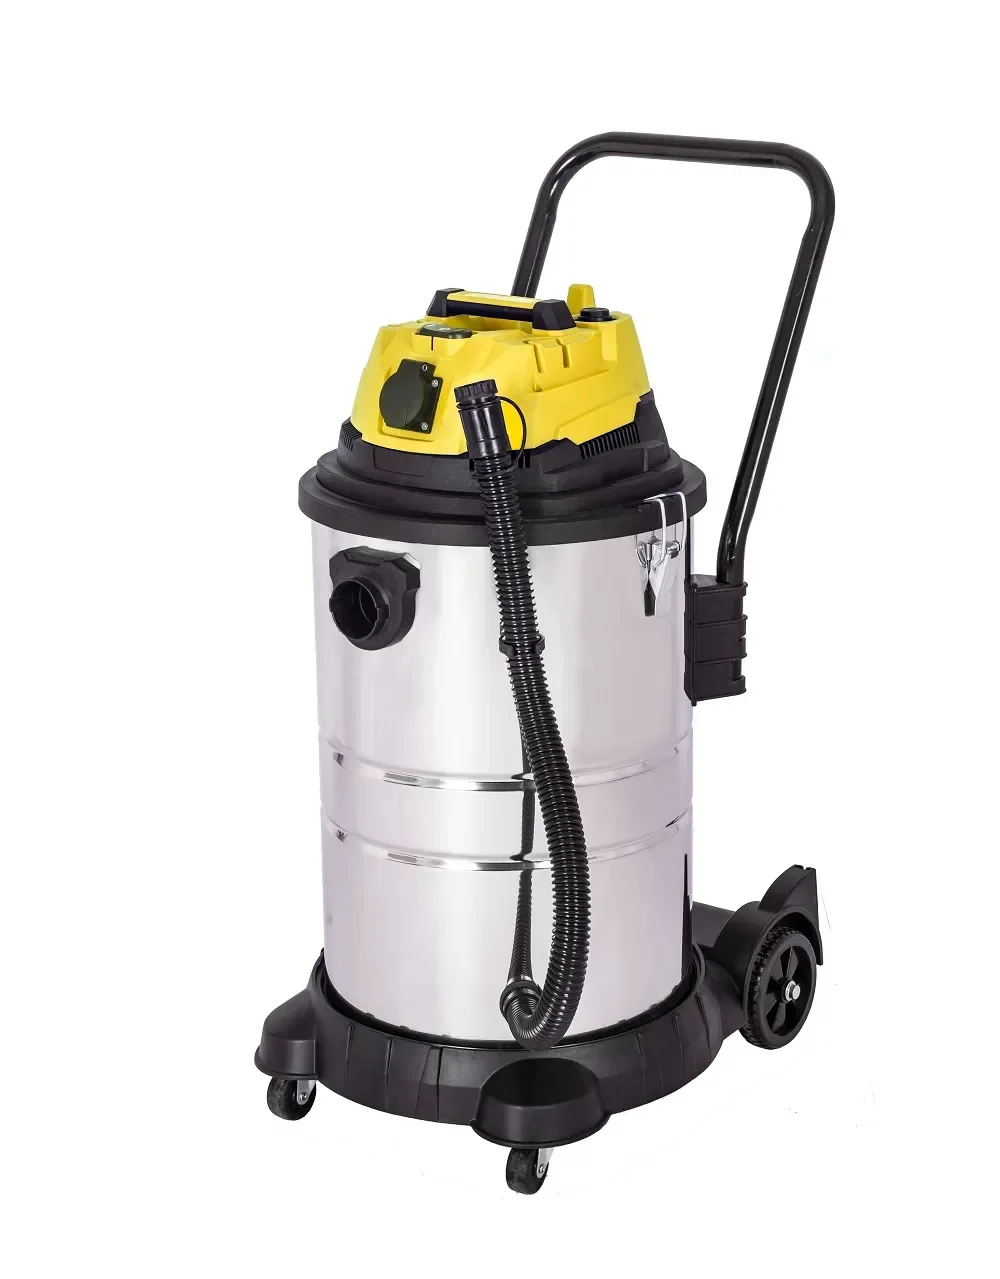 Professional workshop wet and dry vacuum cleaner